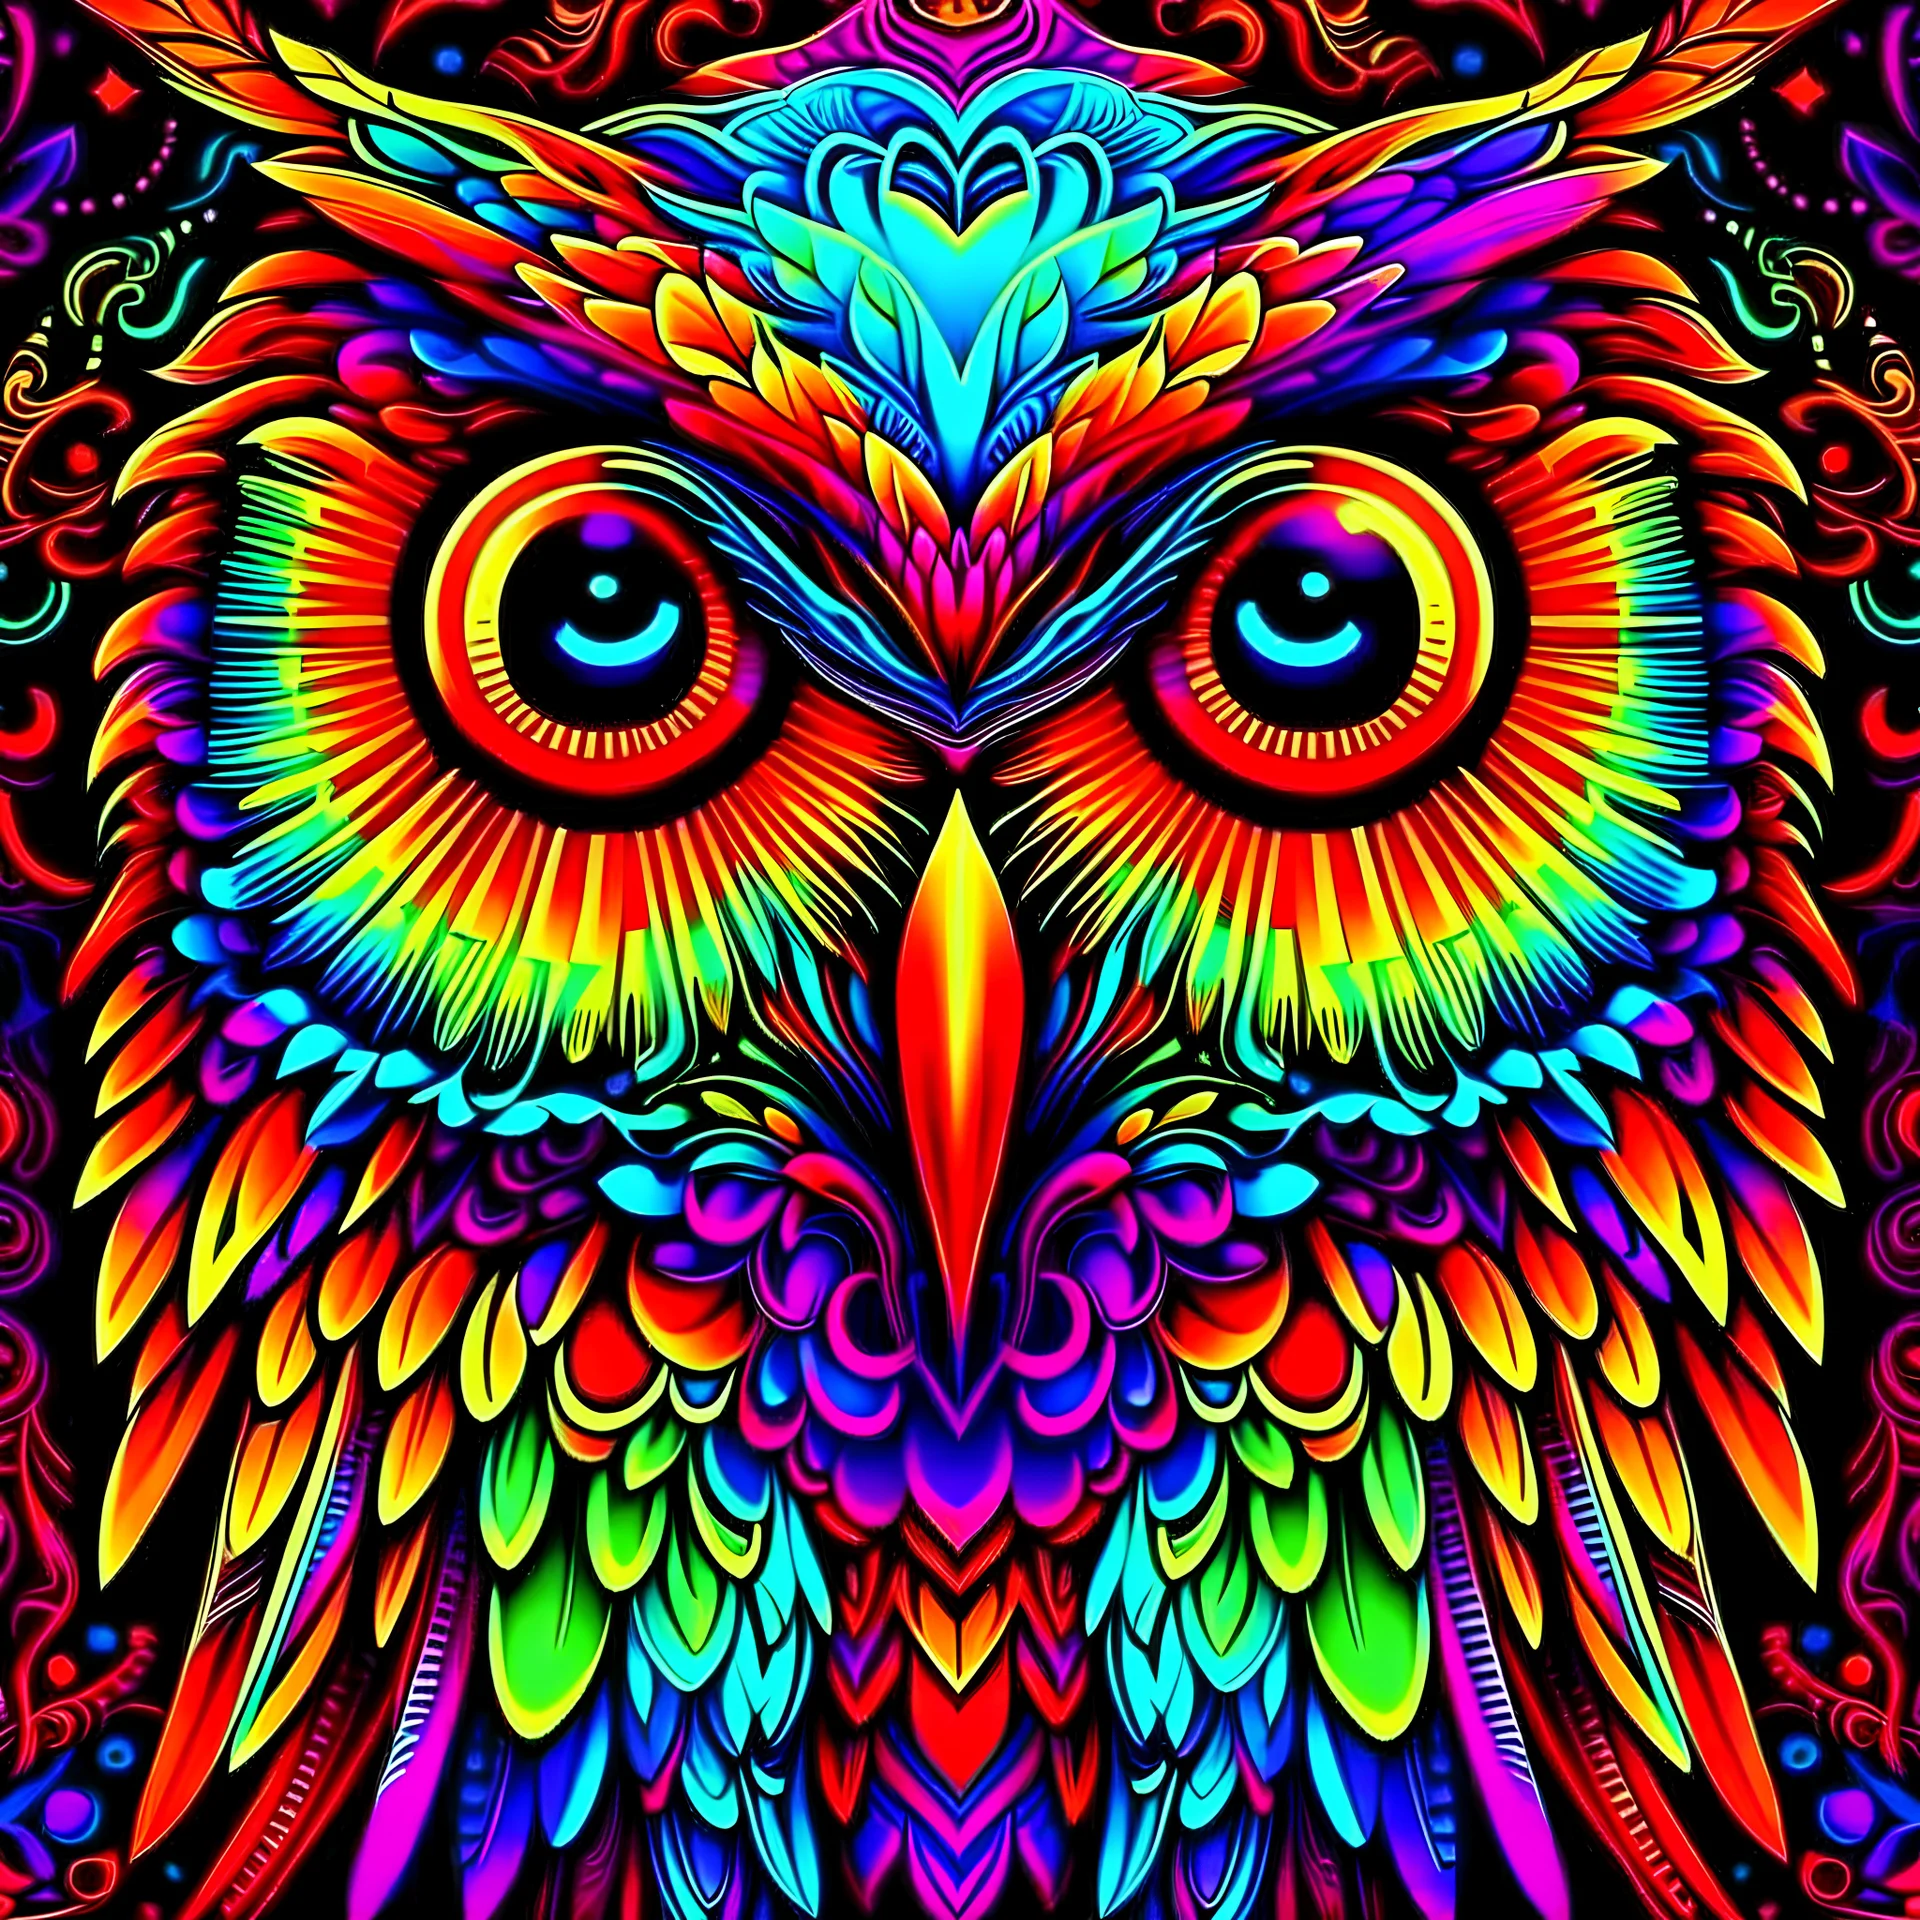 beautiful owl, colorful, 3d, trippy, center, cutie, vibrant, accurate